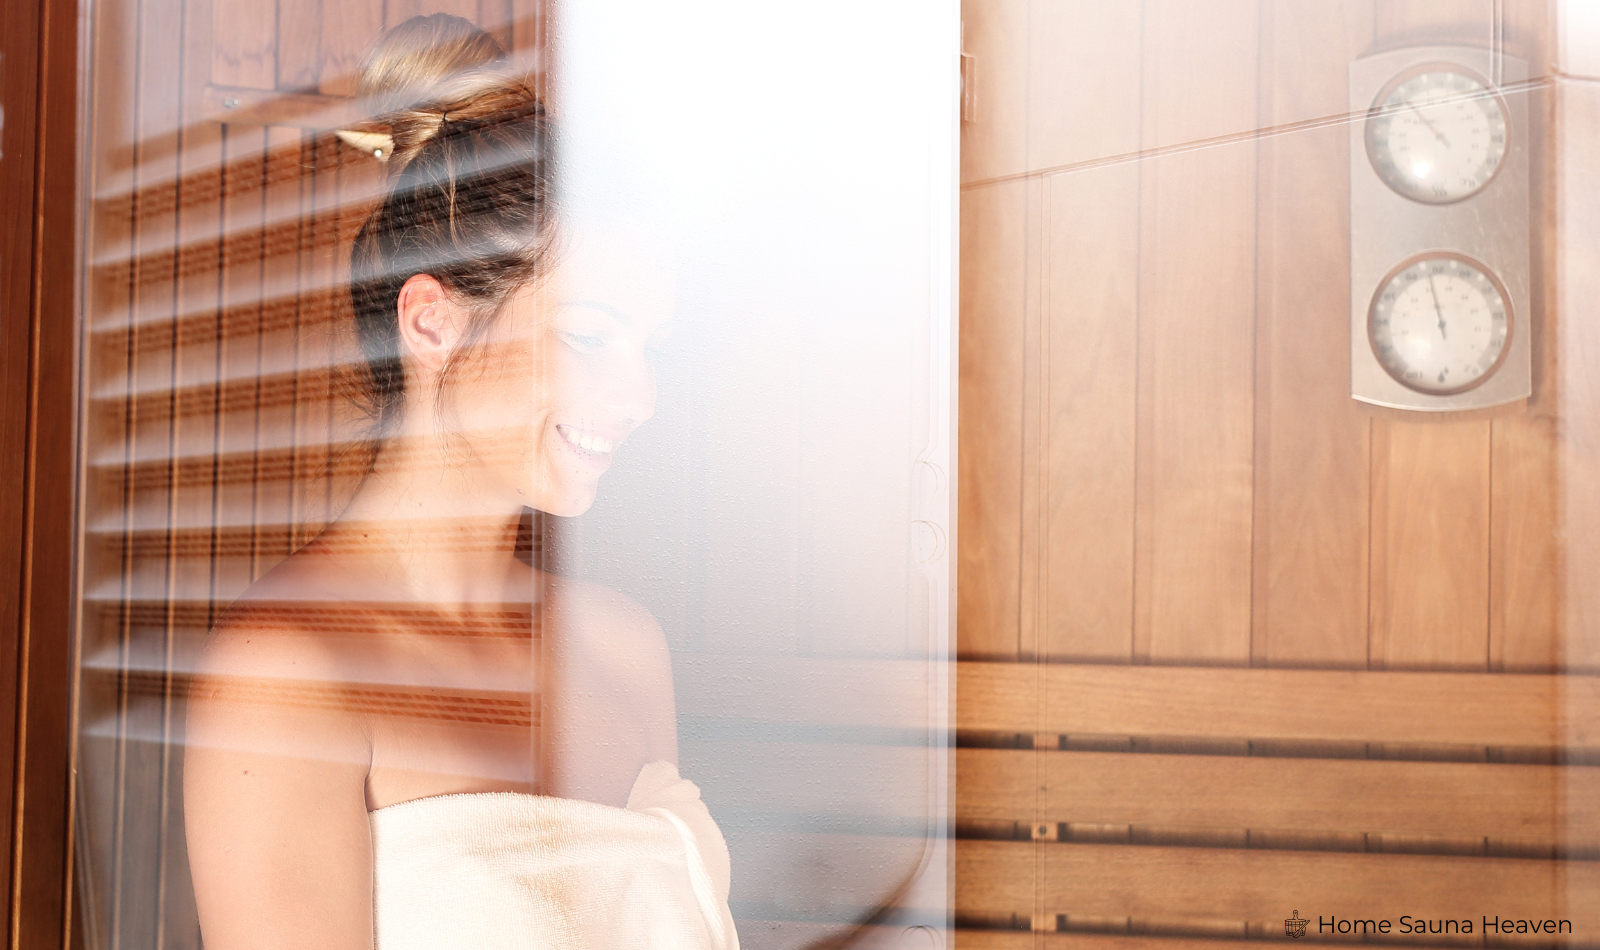 woman standing inside a sauna with a glass door and temperature gauges on the wall